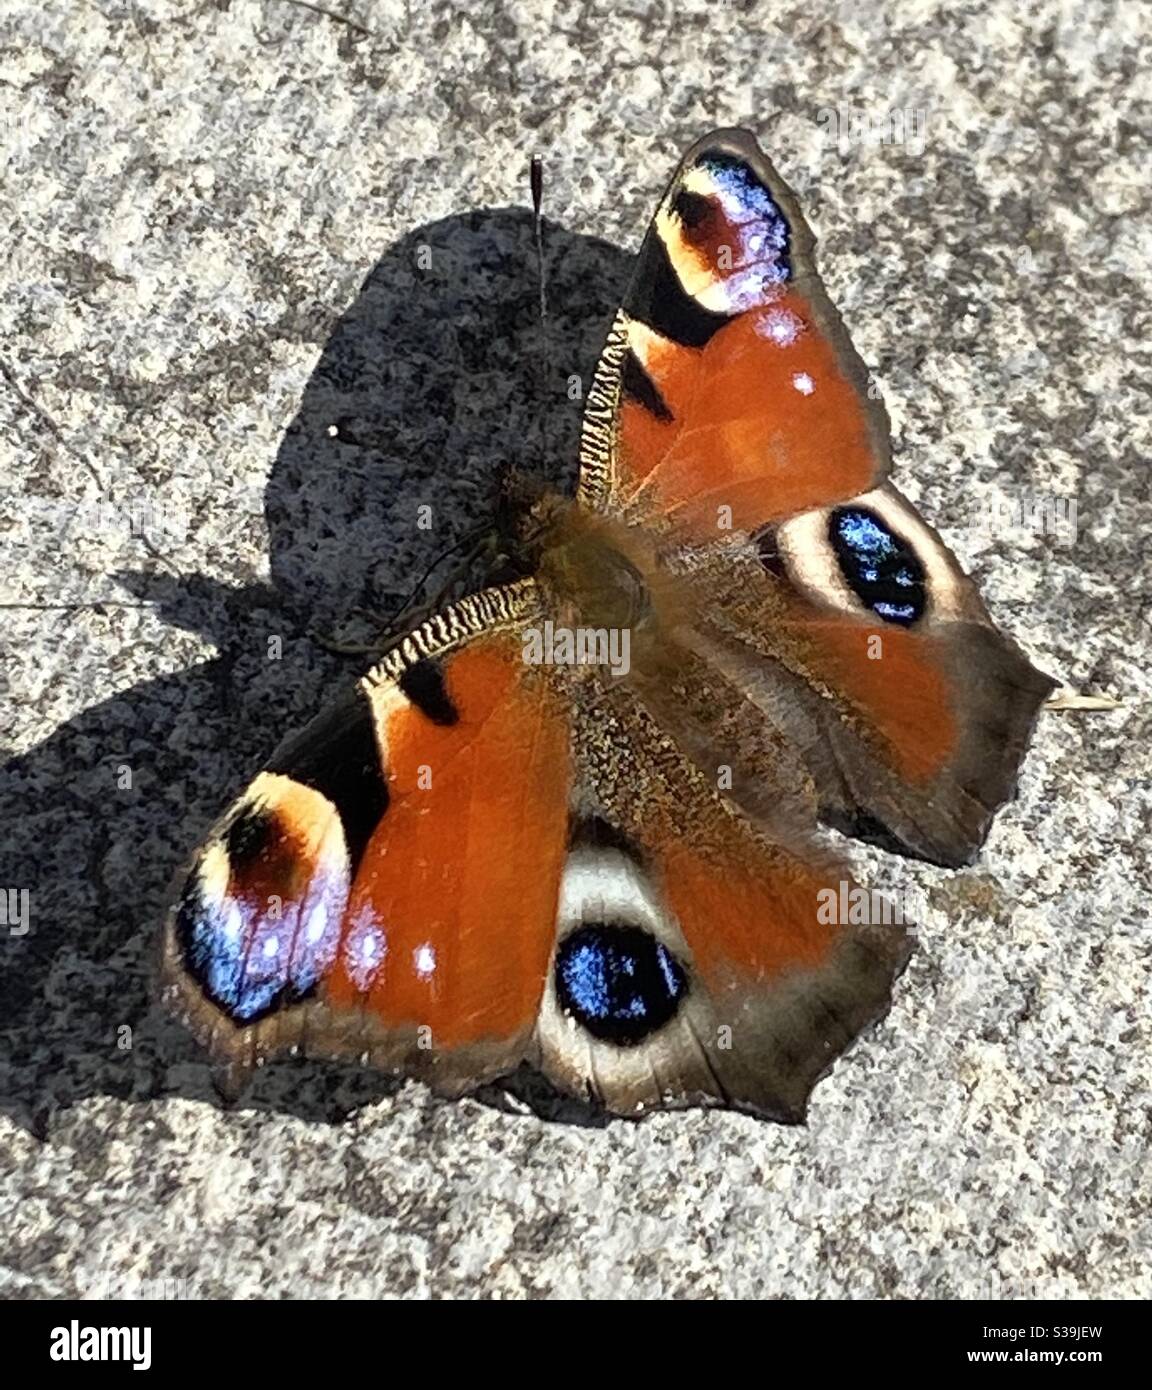 Peacock Butterfly chilling in the sunshine ? Stock Photo